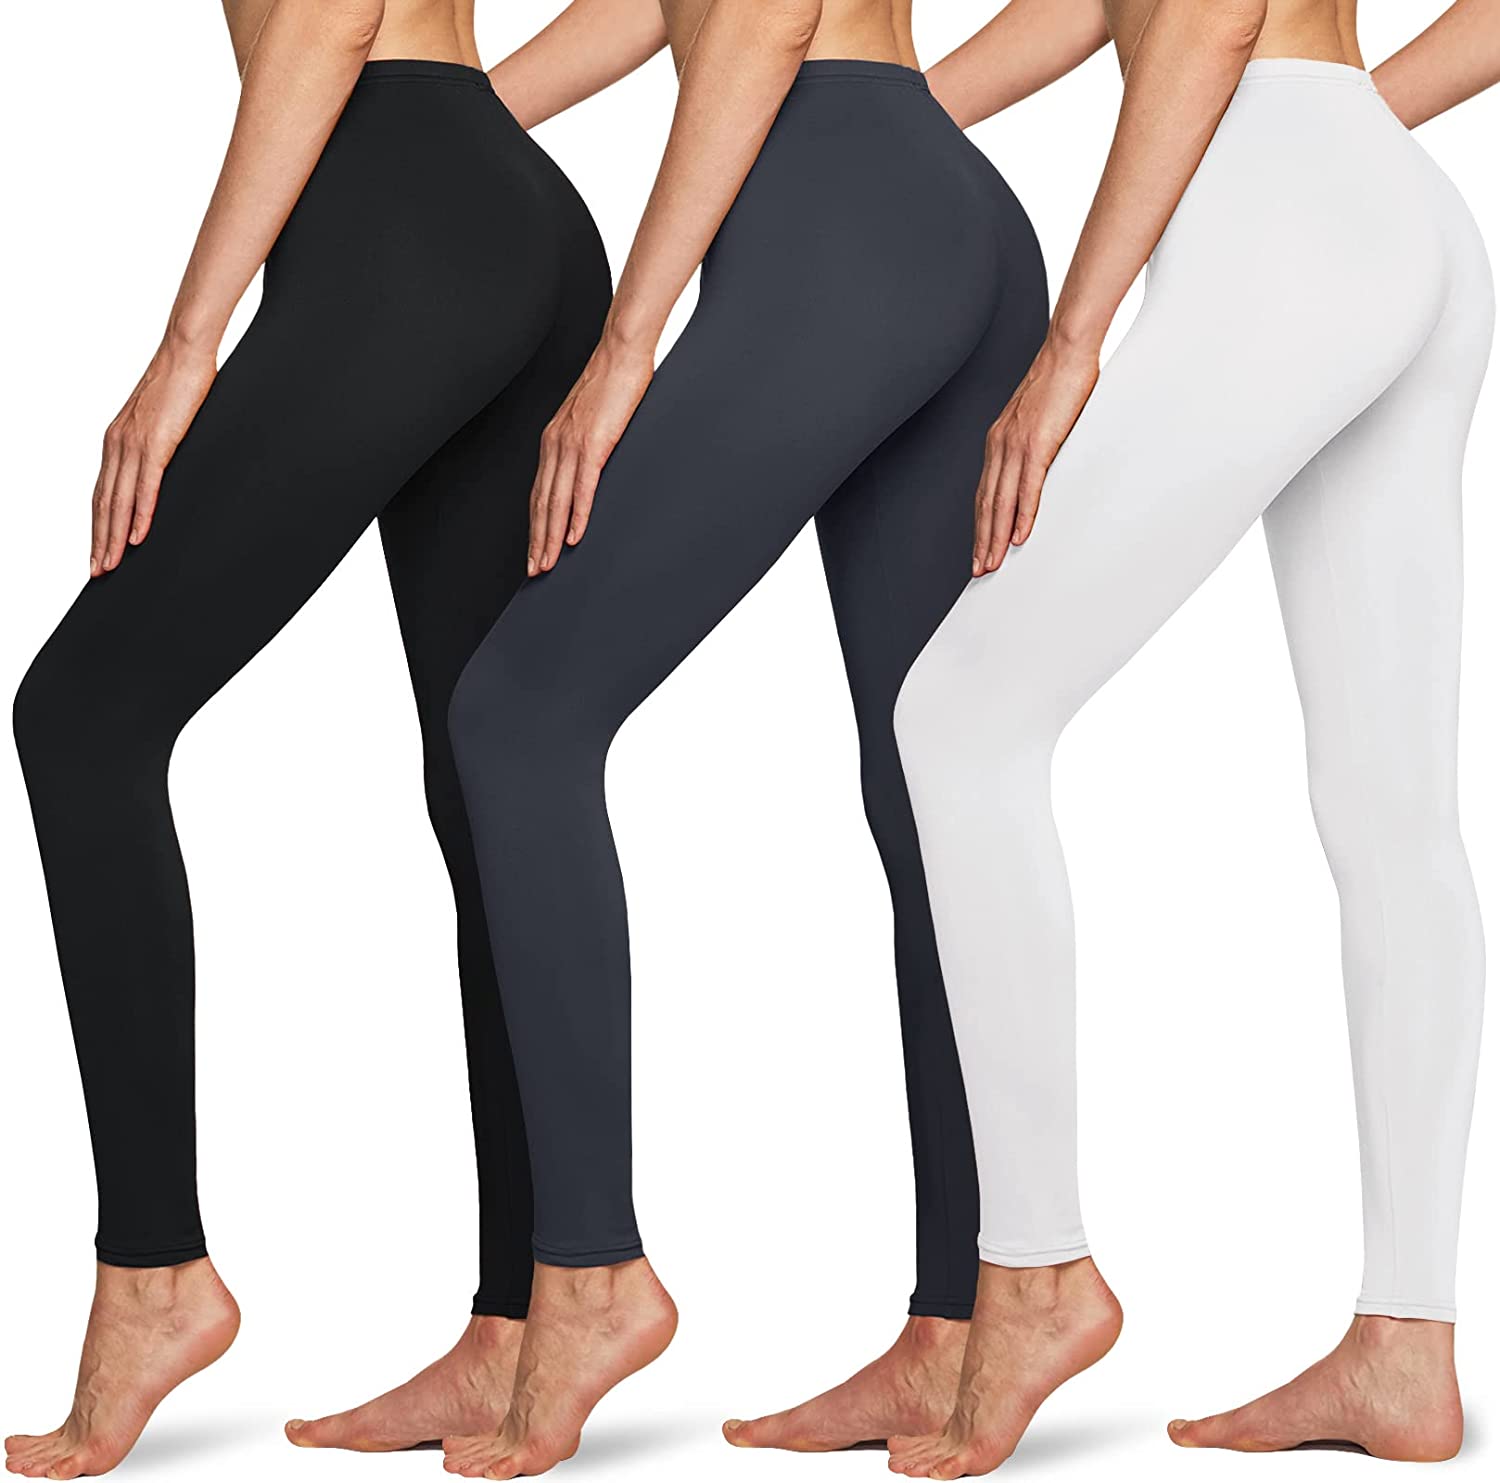 Yoga Gym Base Layer Cool Dry Capri Athletic Leggings Running Workout Tights ATHLIO 1 or 2 Pack Men's 3/4 Compression Pants 